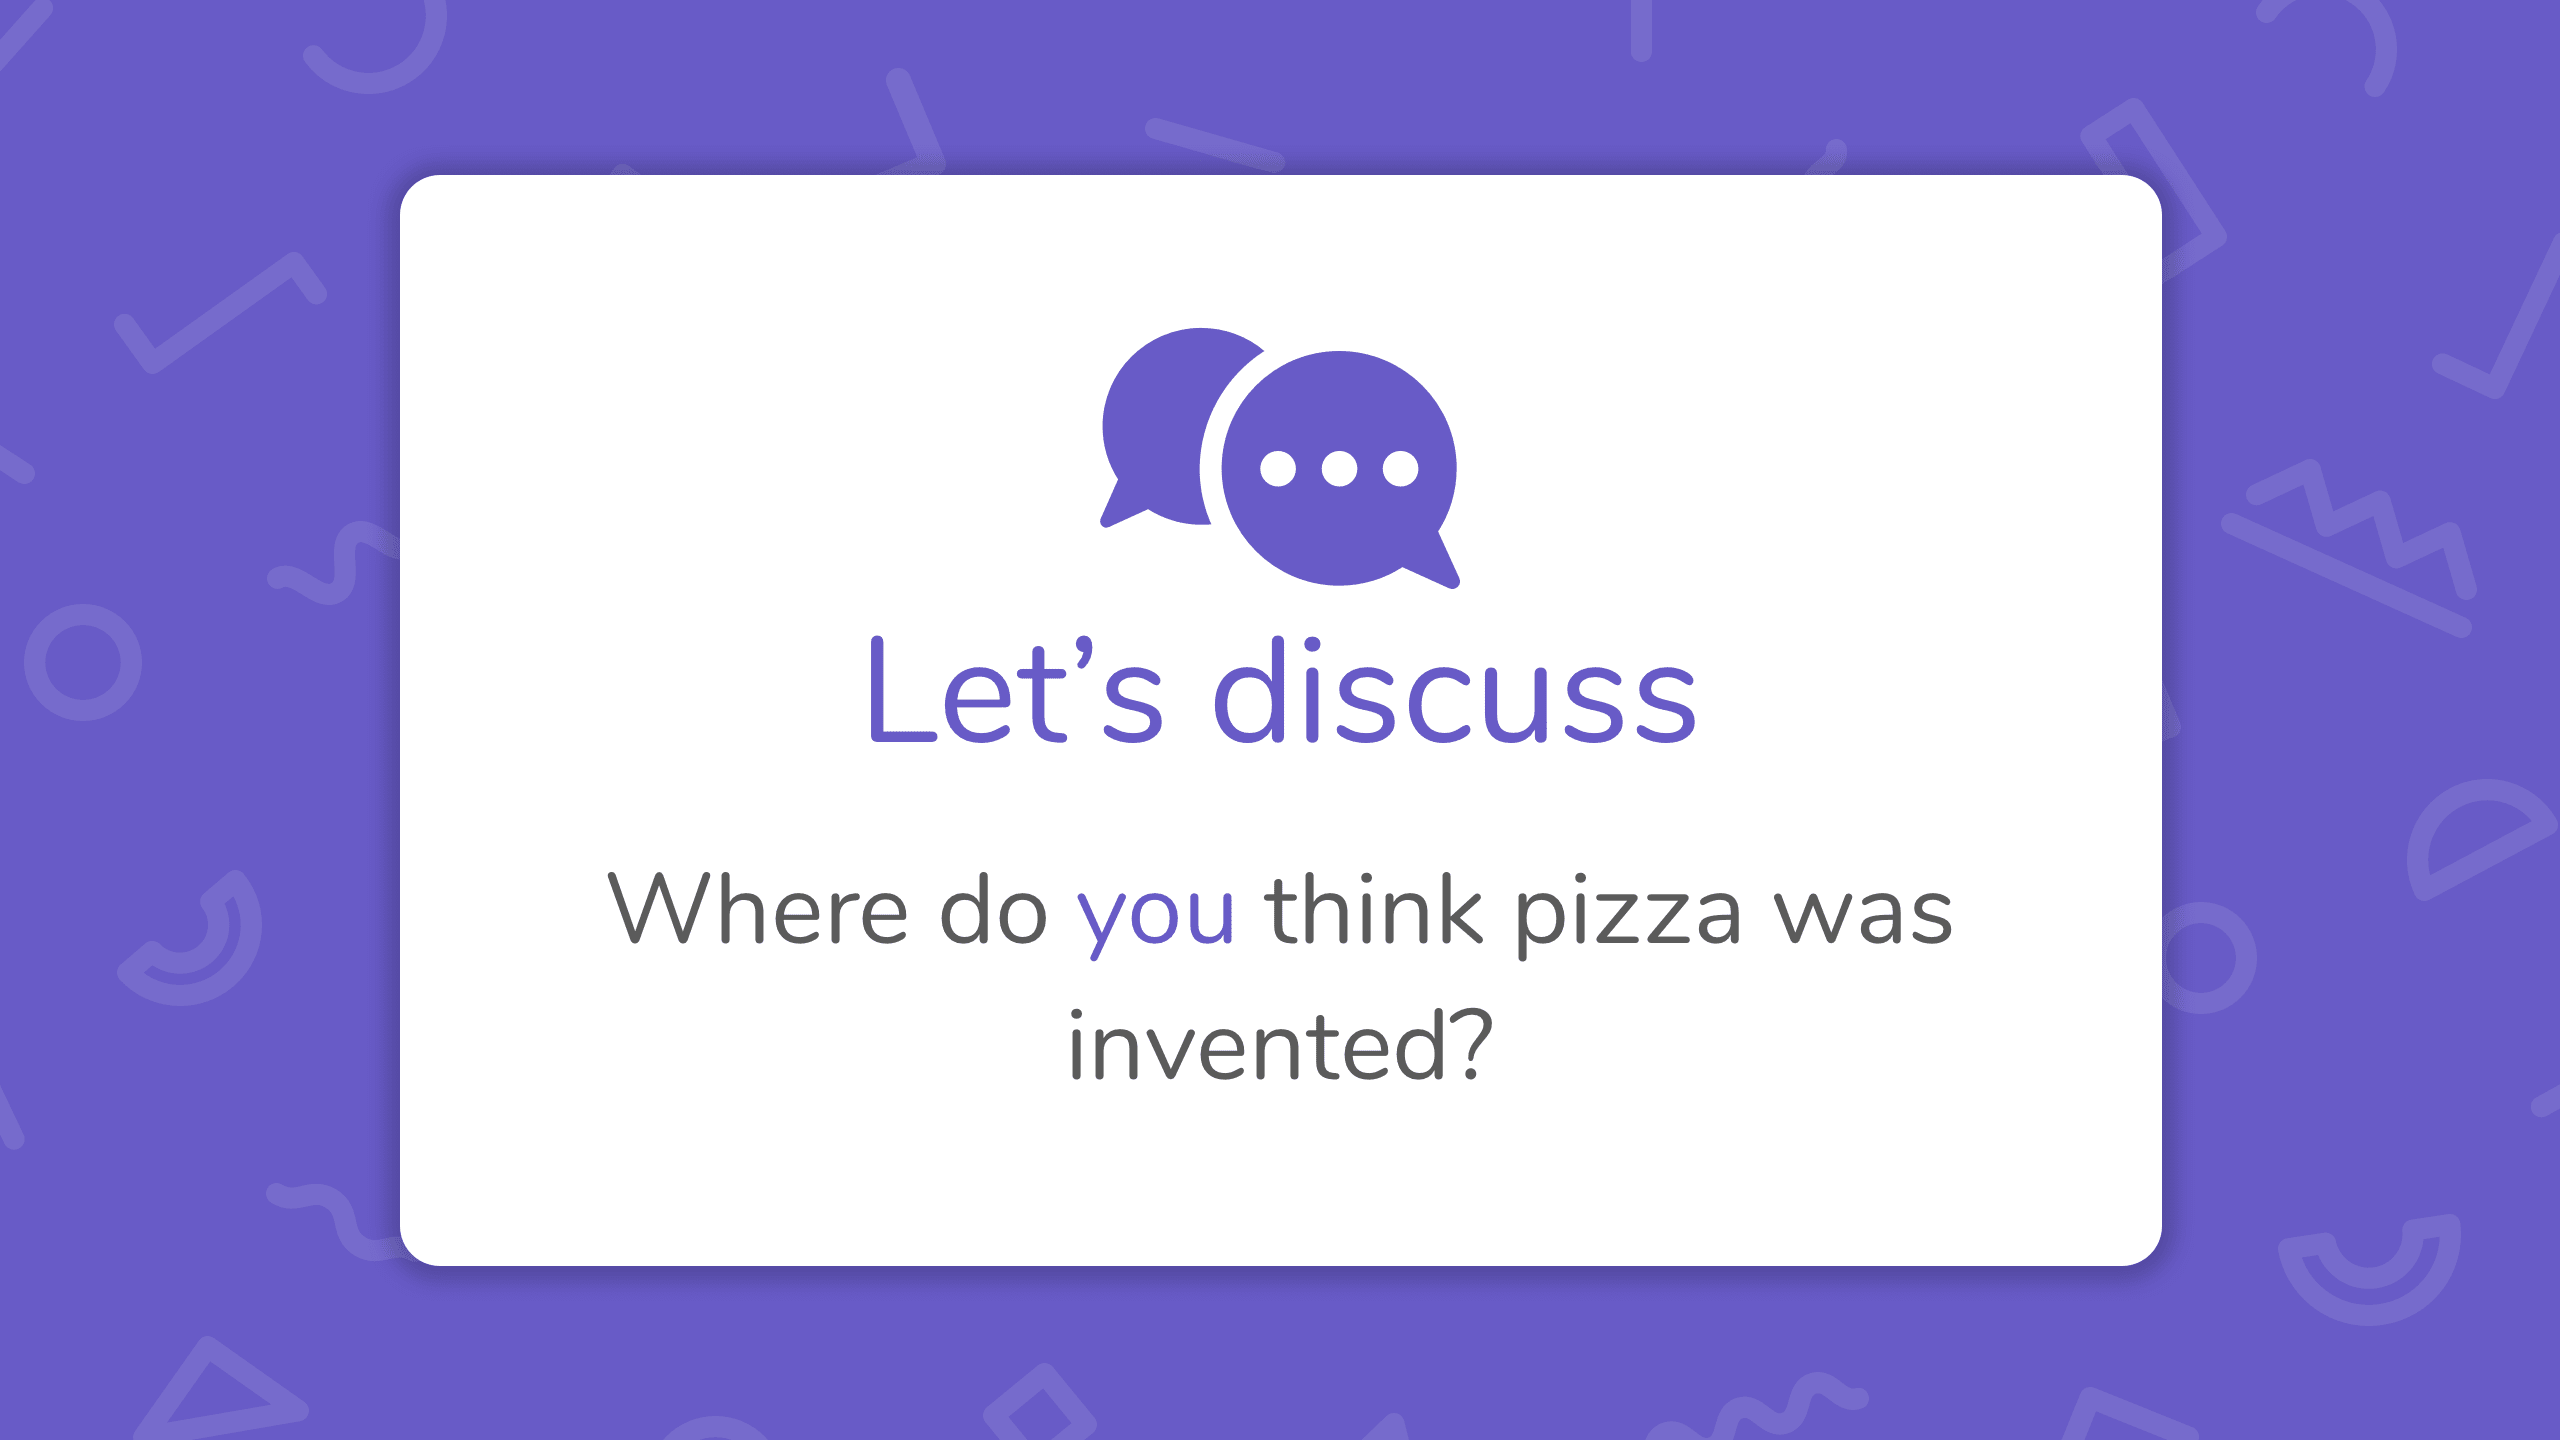 Who invented pizza? - Mystery Doug